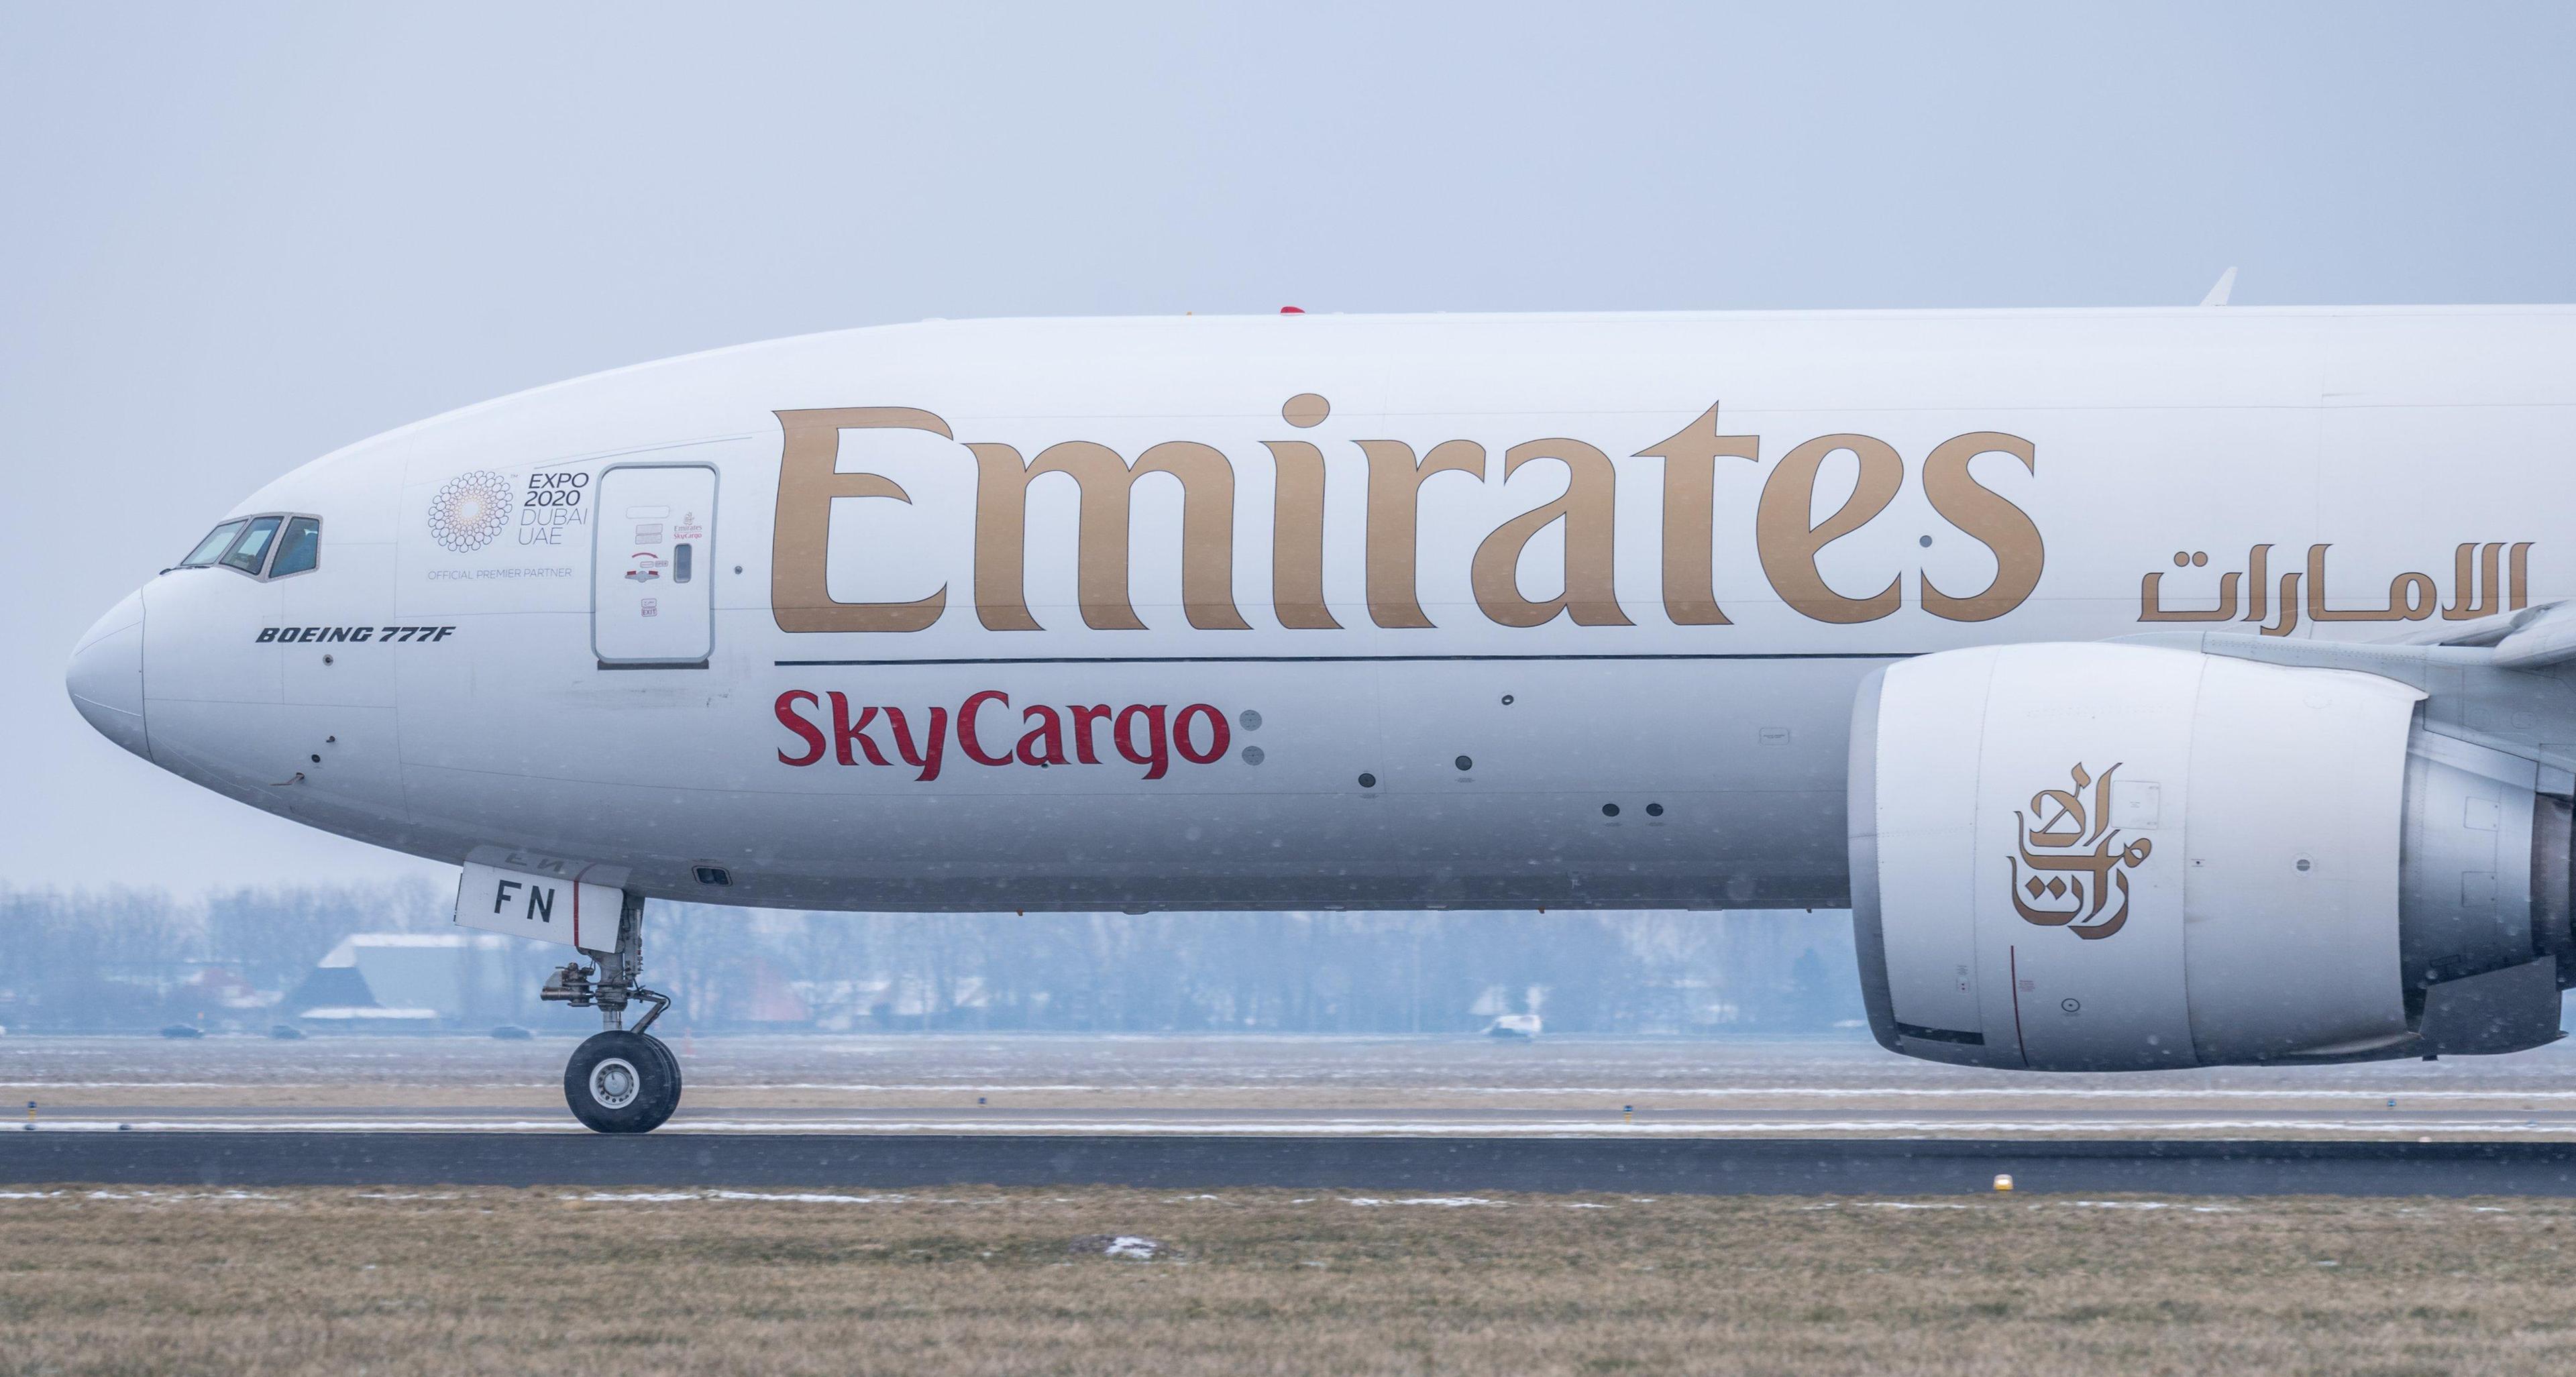 Emirates cargo boss says supply chain constraints could stretch beyond 2022